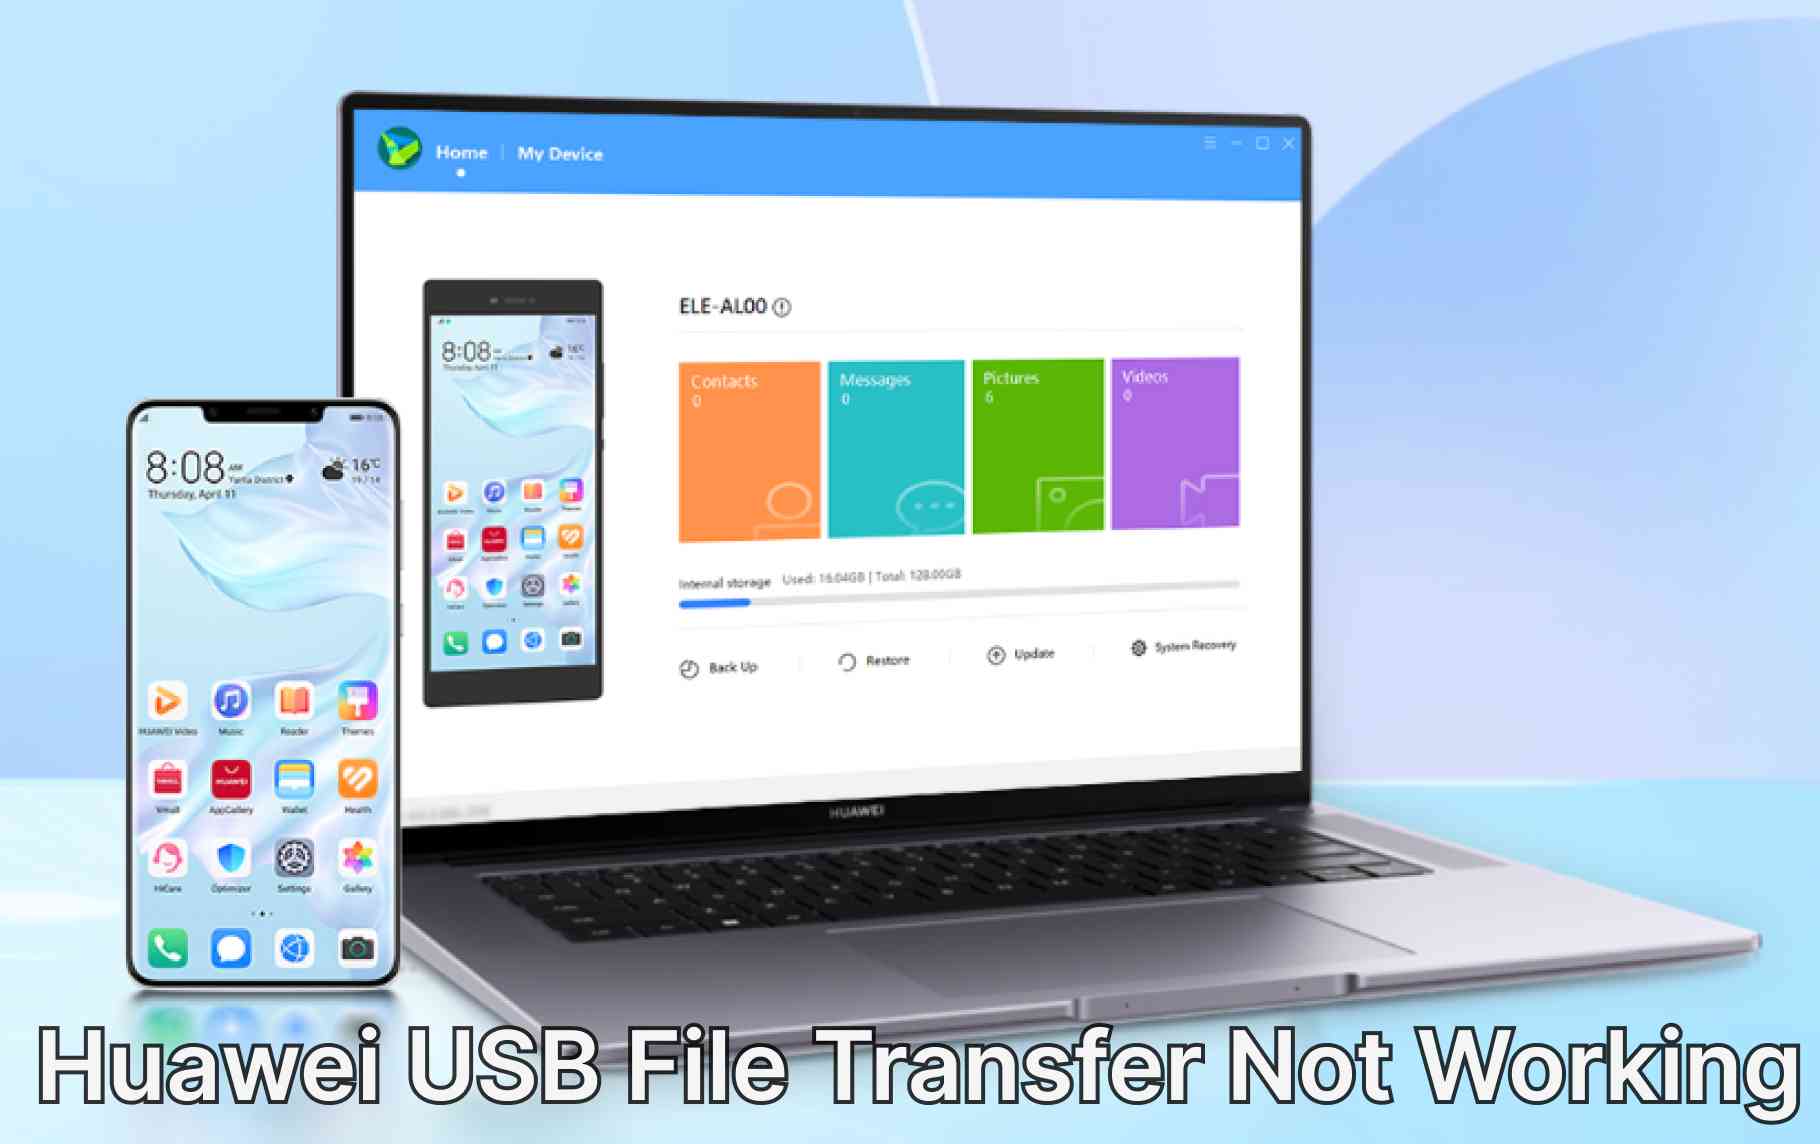 Why is Huawei USB File Transfer Not Working?